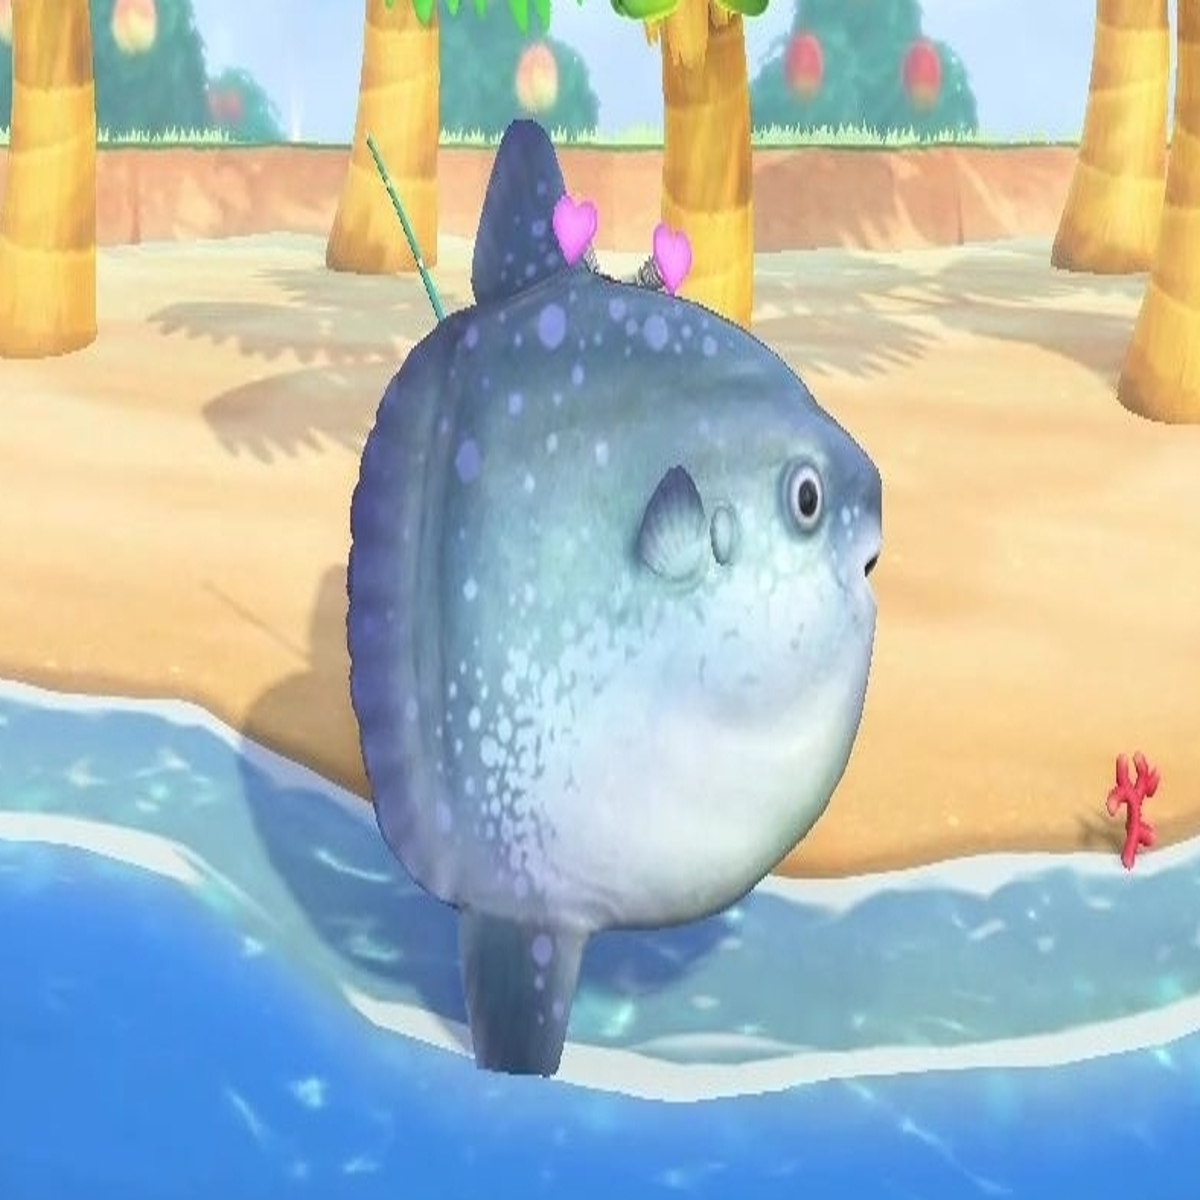 Animal Crossing Ocean Sunfish: How to catch the Ocean Sunfish in